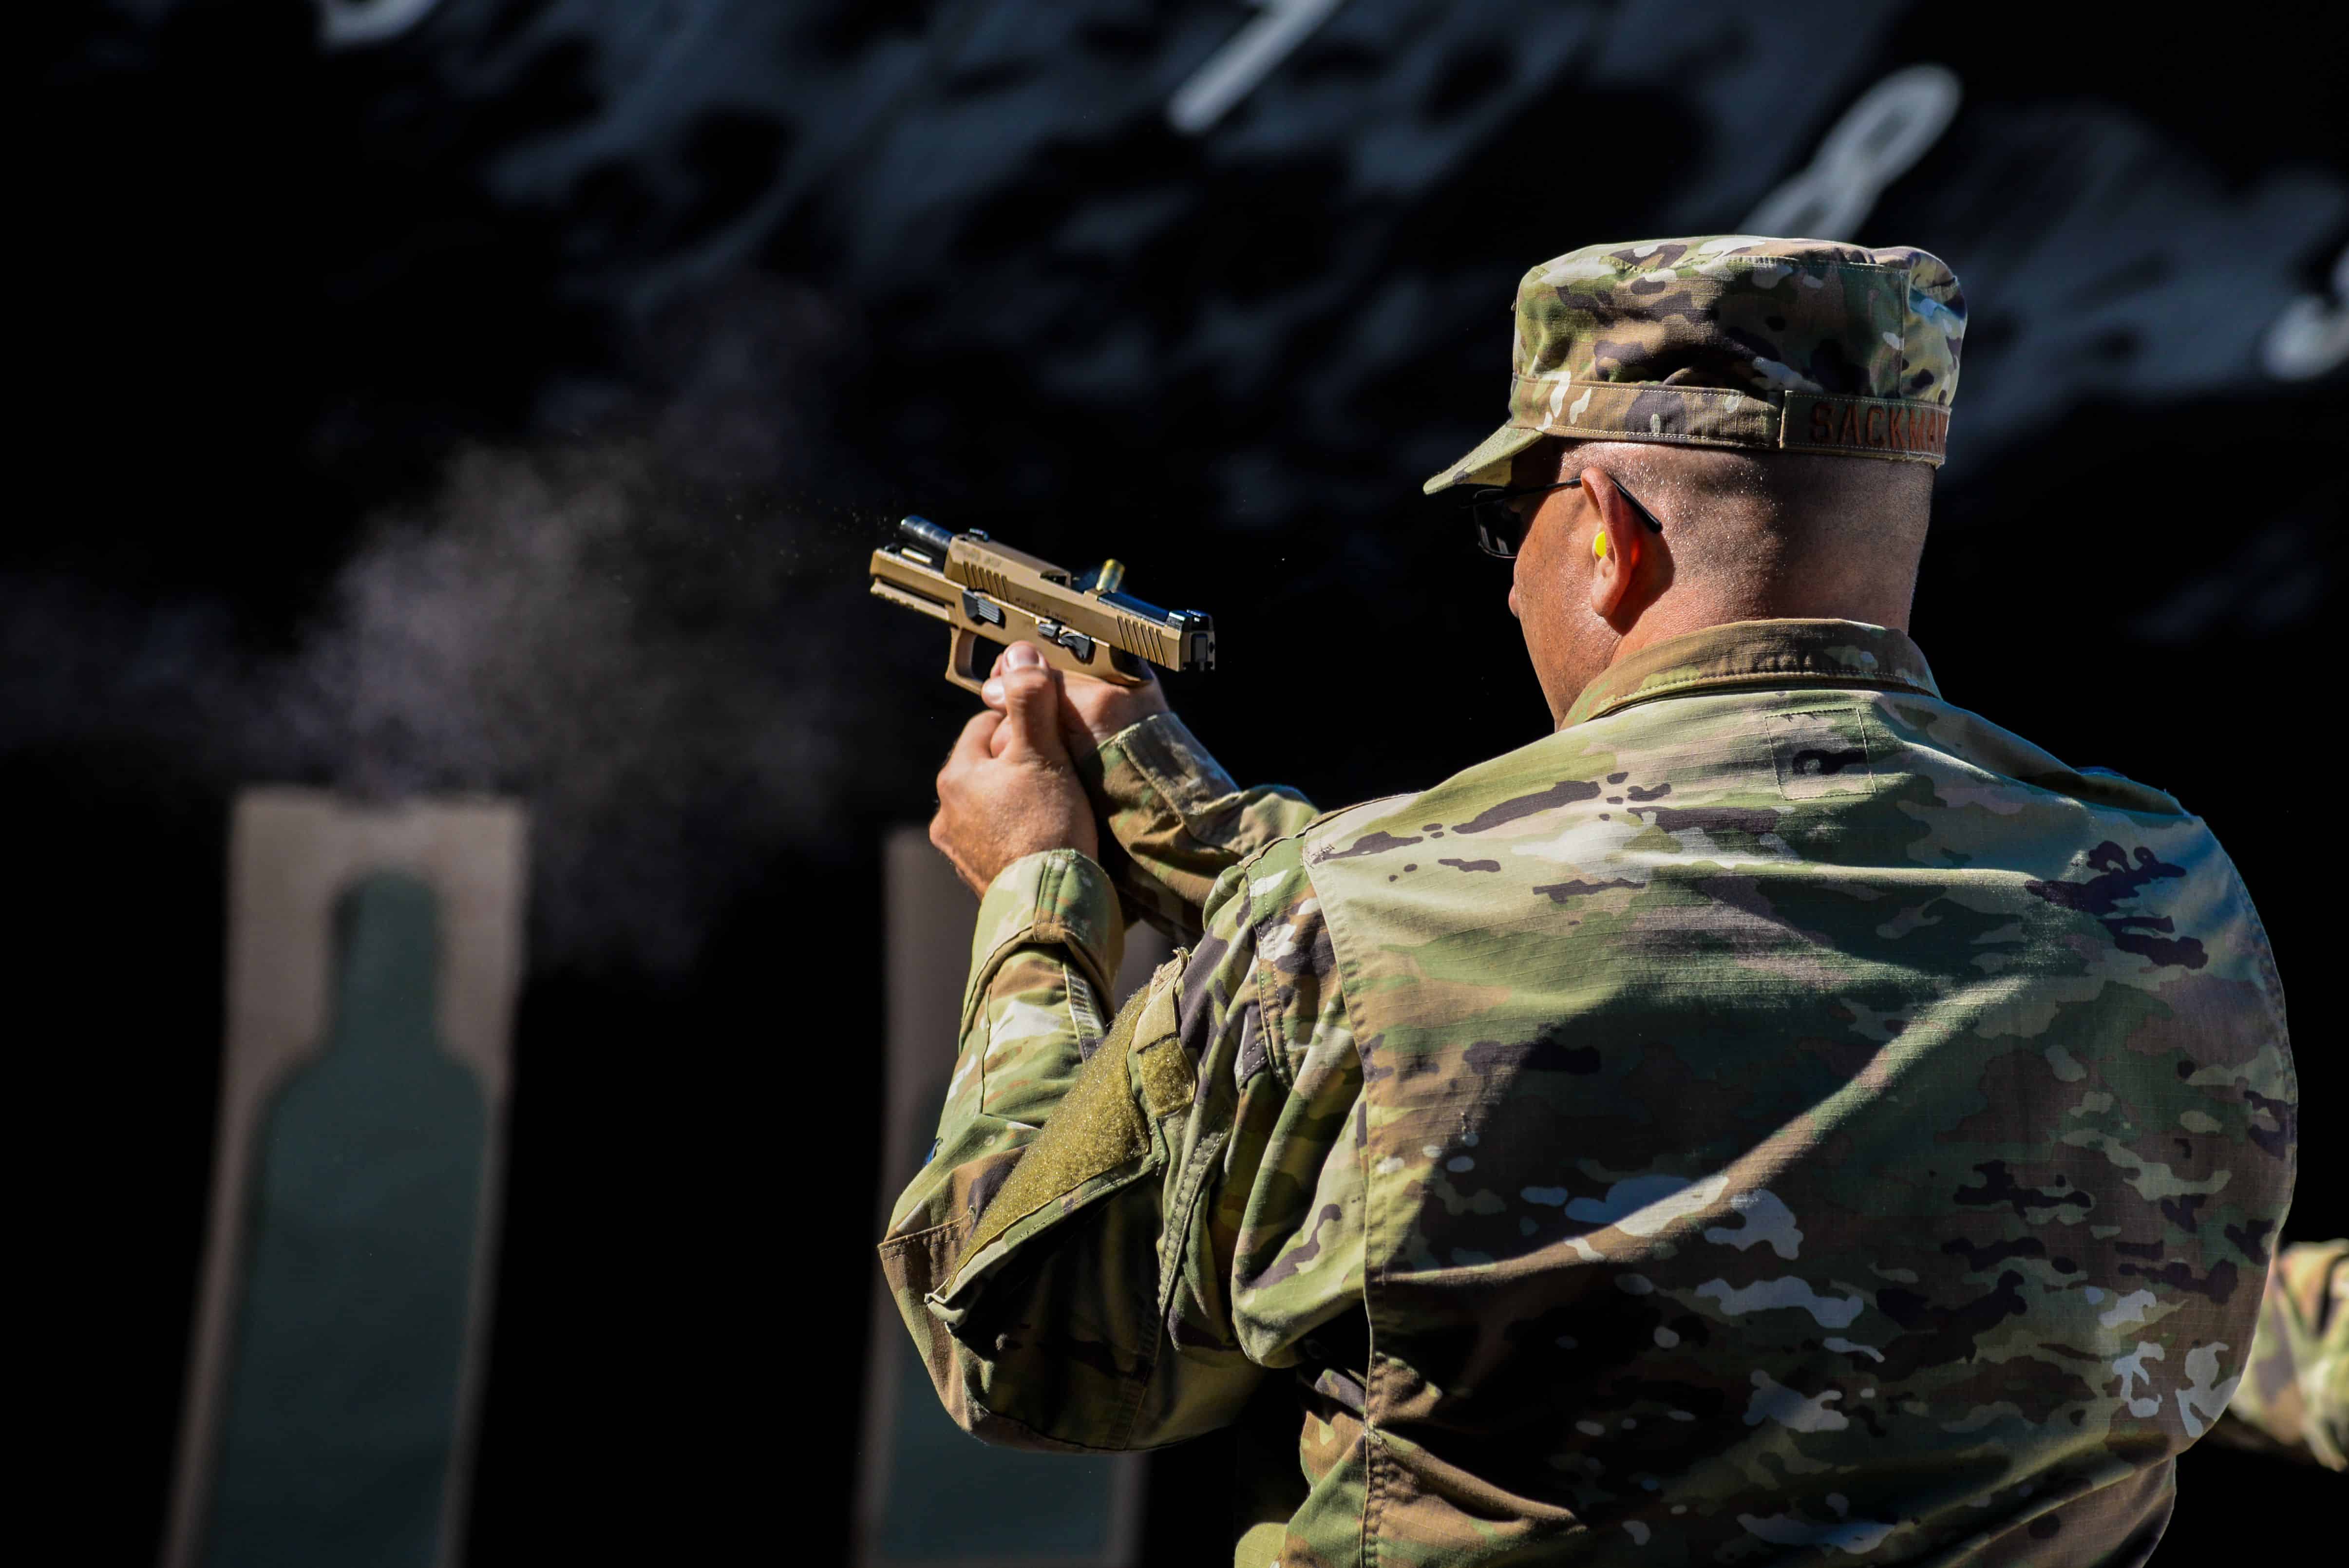 U.S. Air Force Col. Raymond A. Sackman, 177th Fighter Wing inspector general (detail), fires a SIG Sauer P320-M18 handgun Sep. 24, 2021, at the FAA William J. Hughes Technical Center, Egg Harbor Township, N.J. Members of the 177th FW went to the range to qualify for the M18 and gain the perspective of the Airmen who will carry it. (U.S. Air National Guard photo by Senior Airman Hunter Hires)